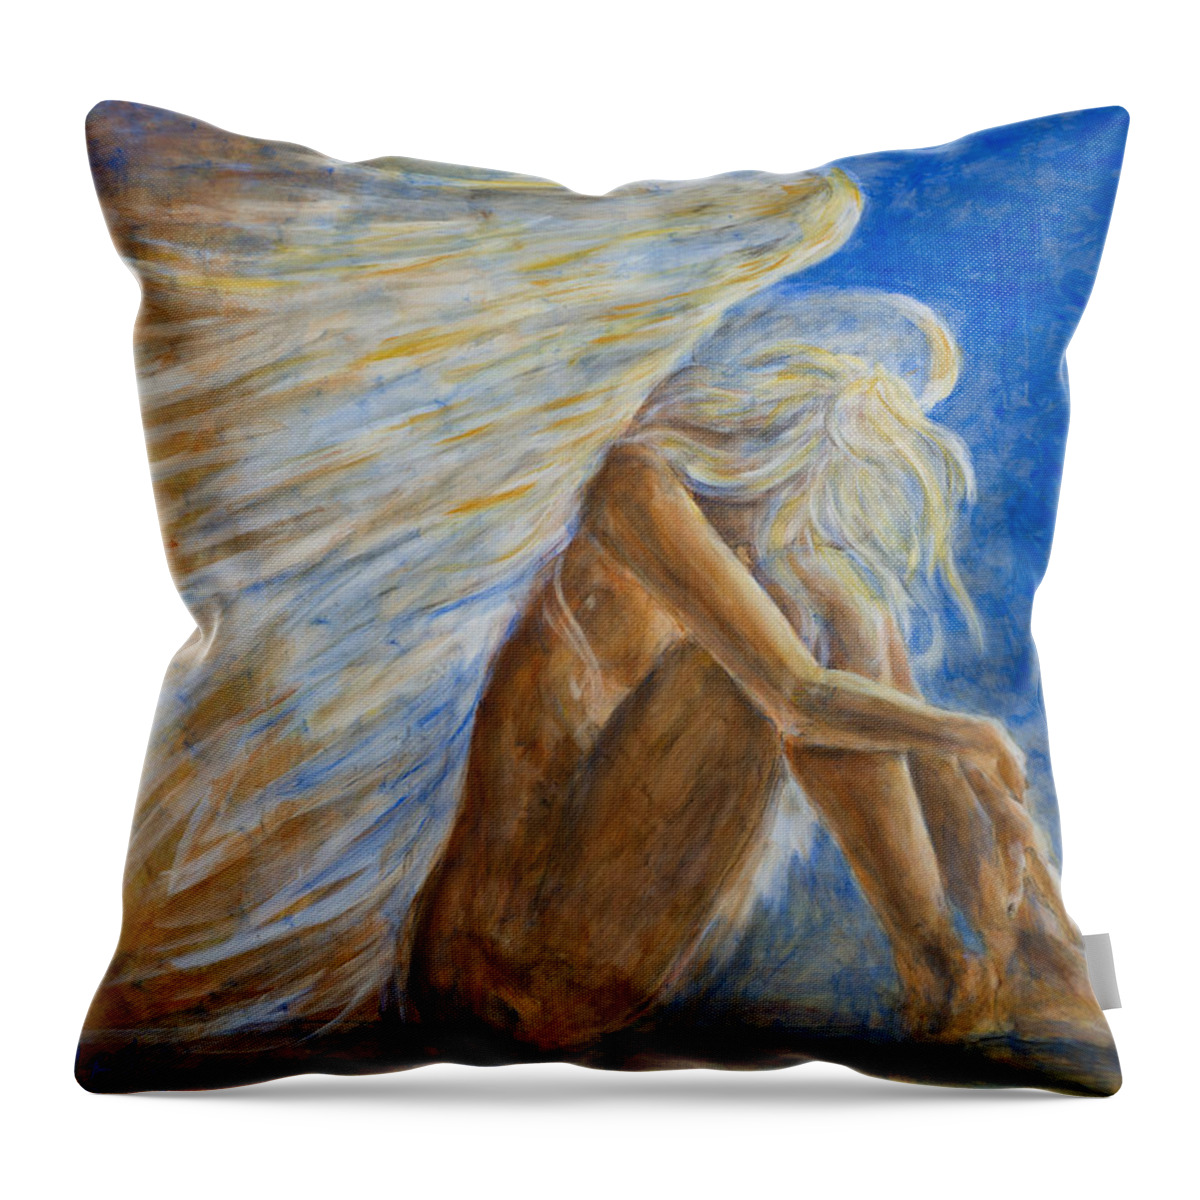 Angel Throw Pillow featuring the painting Blu Angel by Nik Helbig